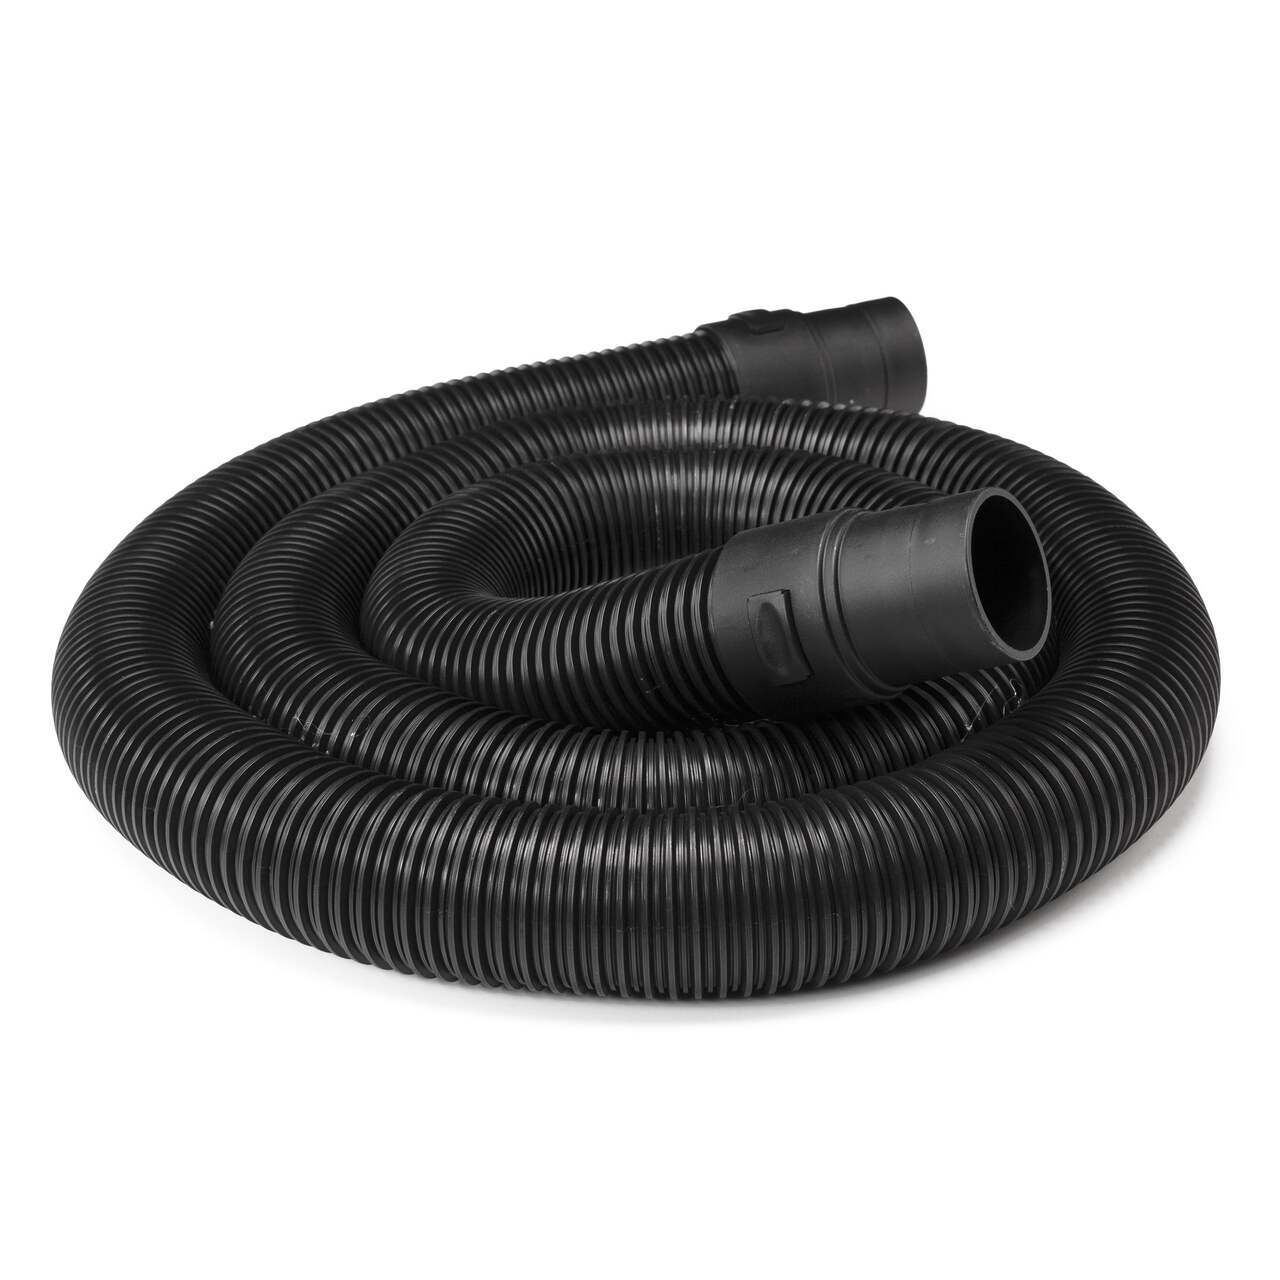 Shop-Vac® CV2H7 Dust Collection Extension Hose for Wet/Dry Shop Vacuums,  8-ft x 2.5-in